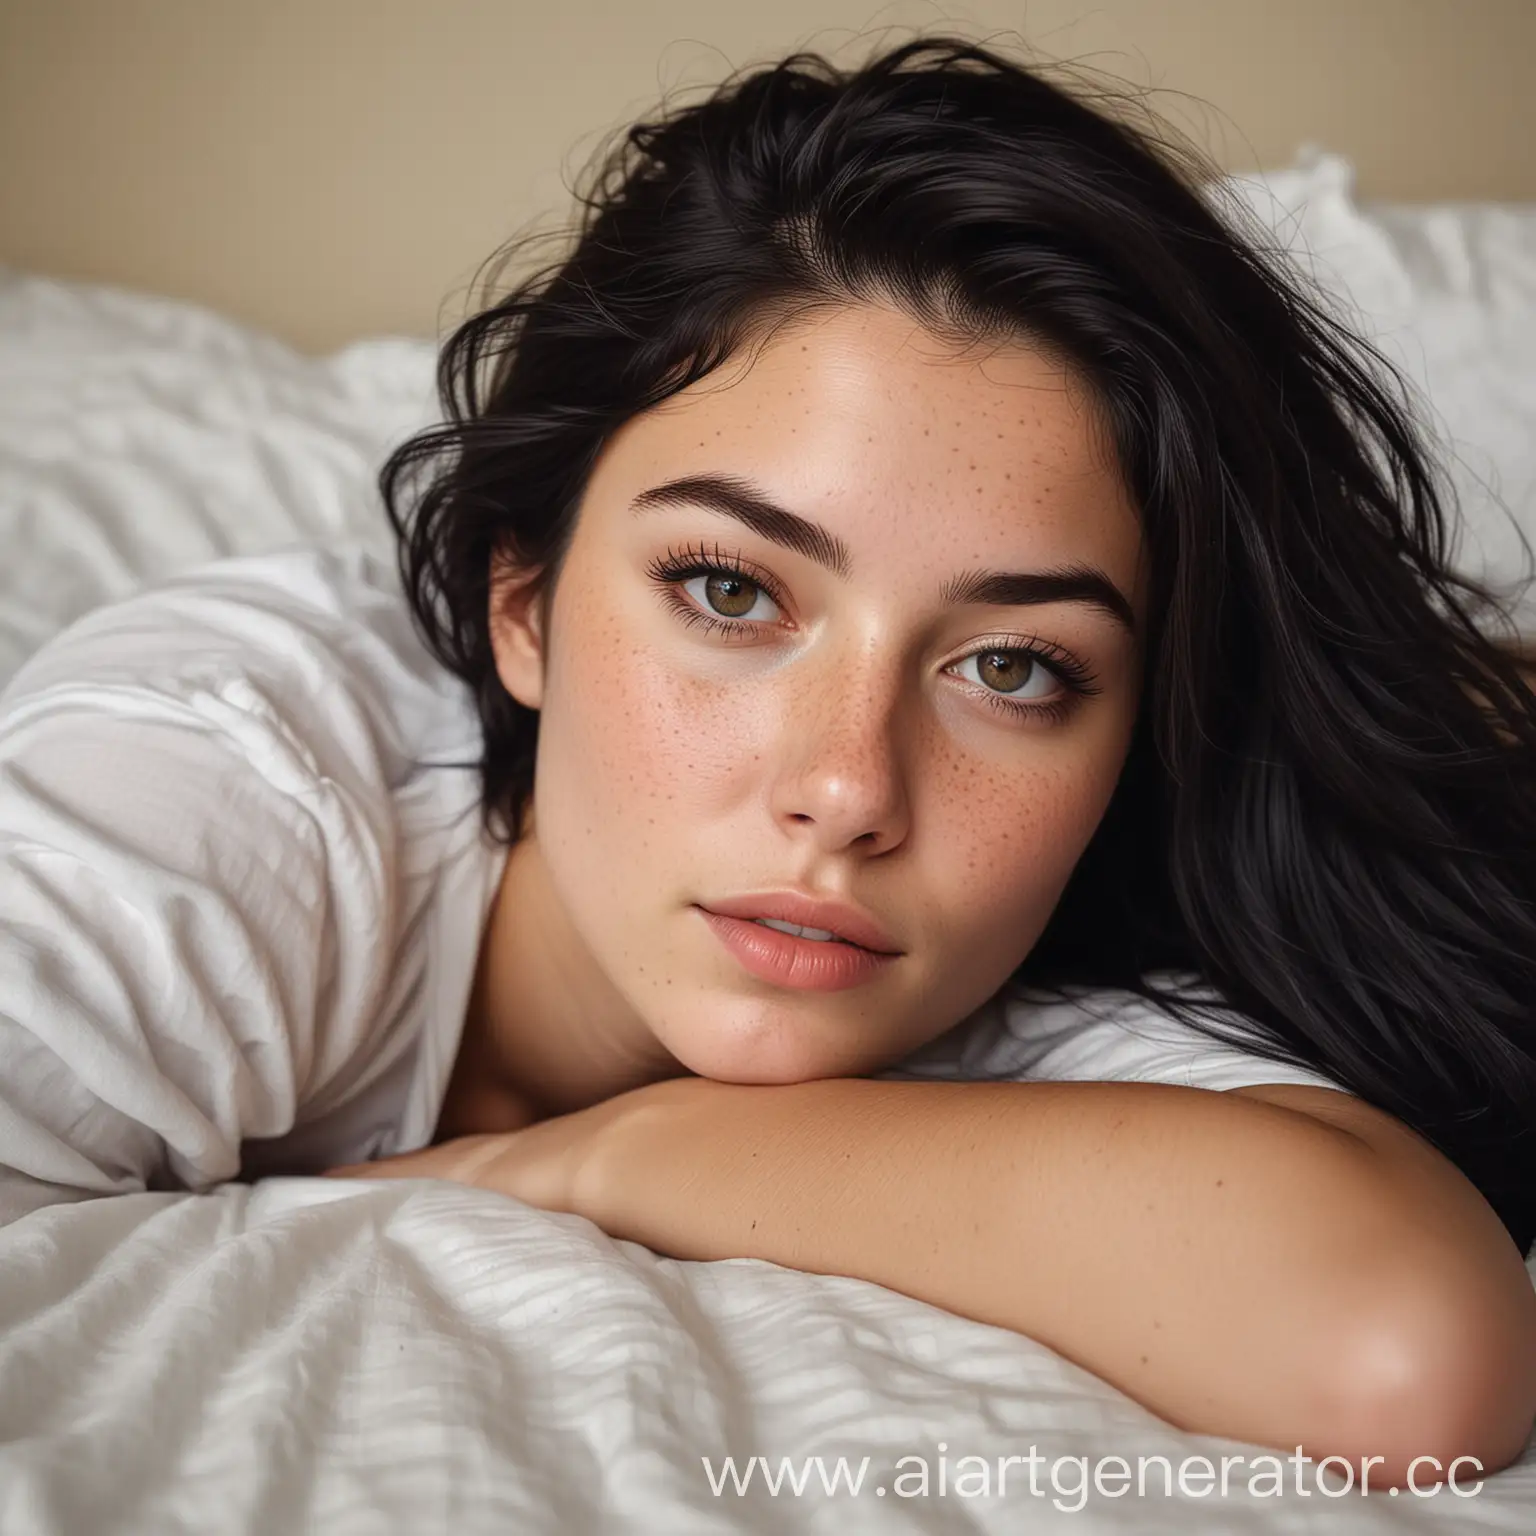 A highly detailed, realistic selfie taken by a girl with black hair and subtle freckles, lying on her bed. The photo highlights her face, upper body, and the cozy bed setting, all in a bright and intimate atmosphere. Created Using: precision photography, intense detail capture, luminous lighting, personal and intimate angle, realistic hair and skin textures, comfortable bed setting --ar 9:16 --v 6.0